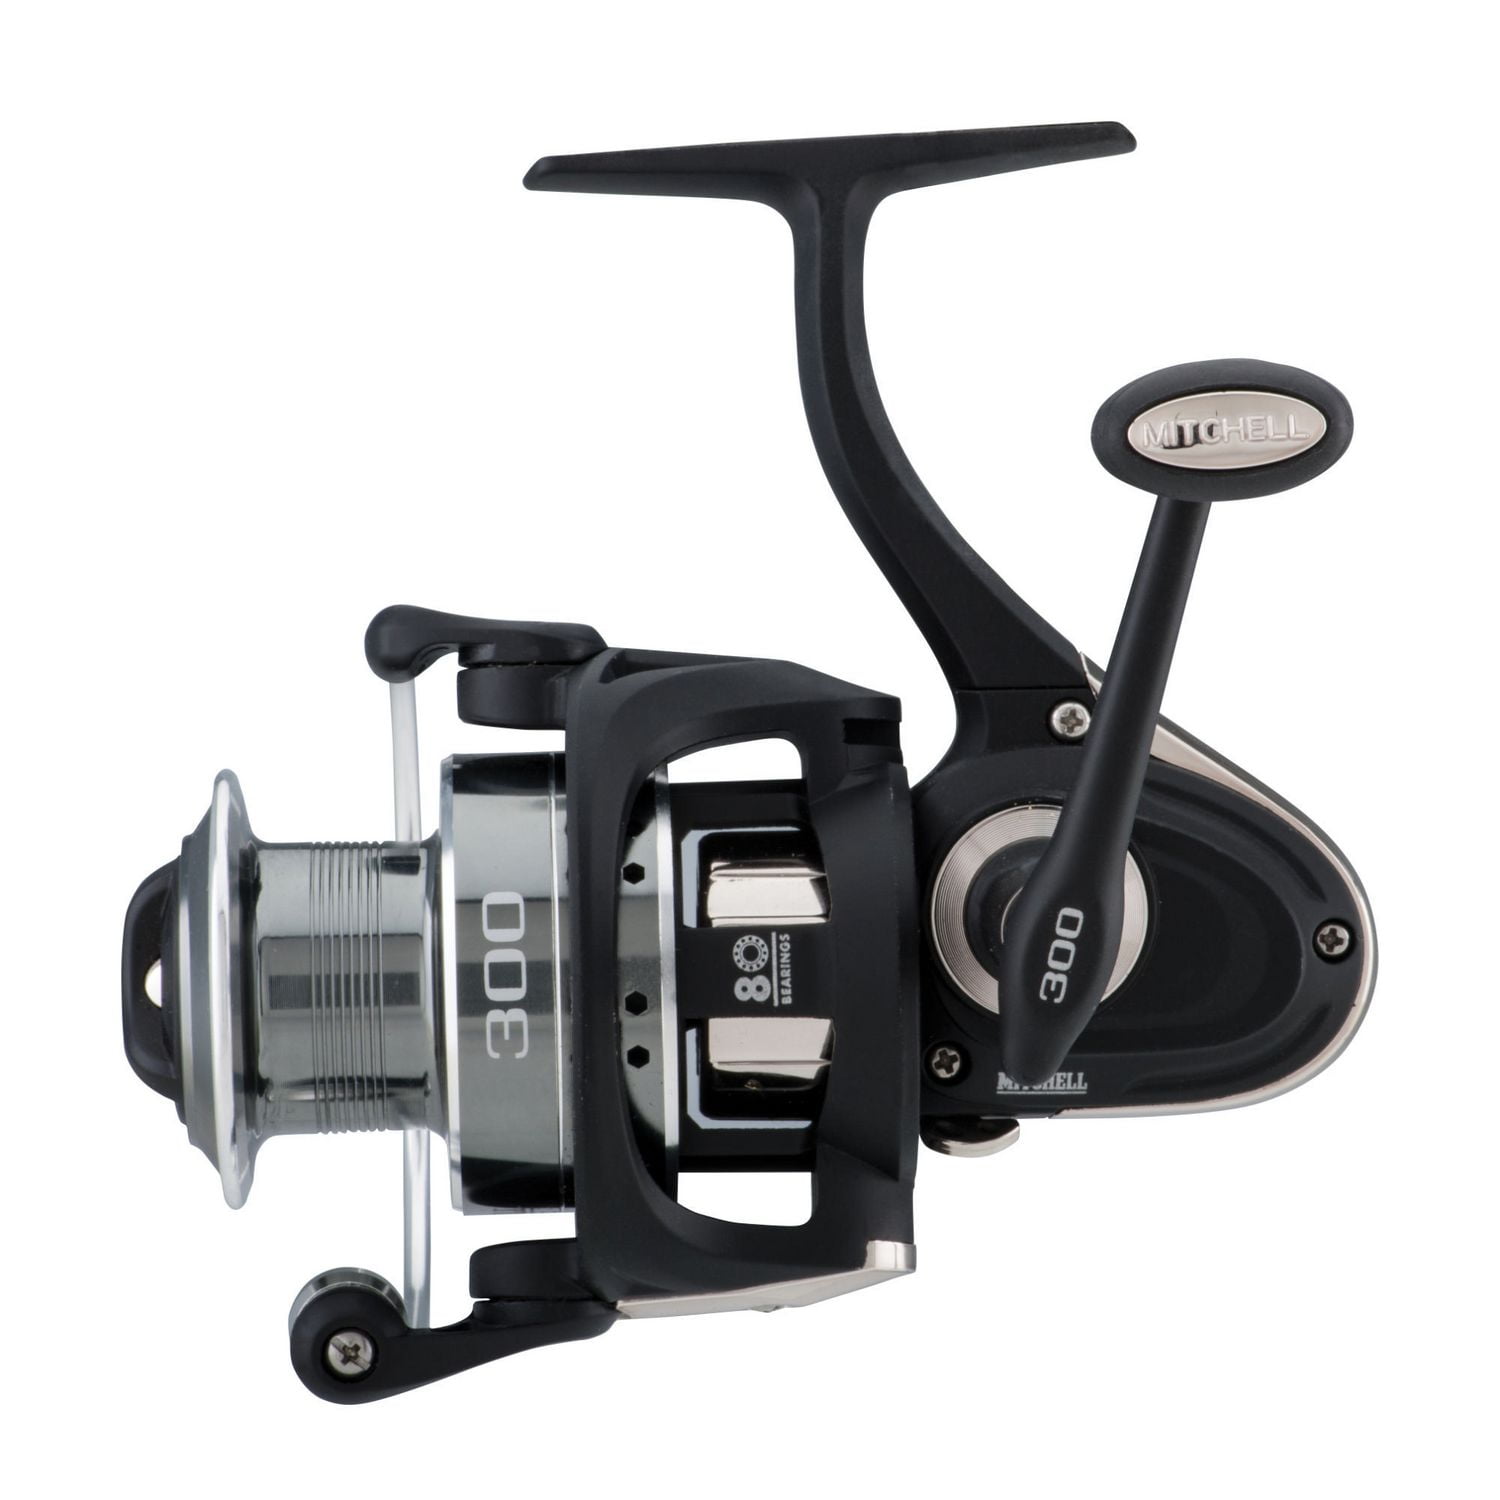 Mitchell 300 Spinning Fishing Reel, The next generation modern